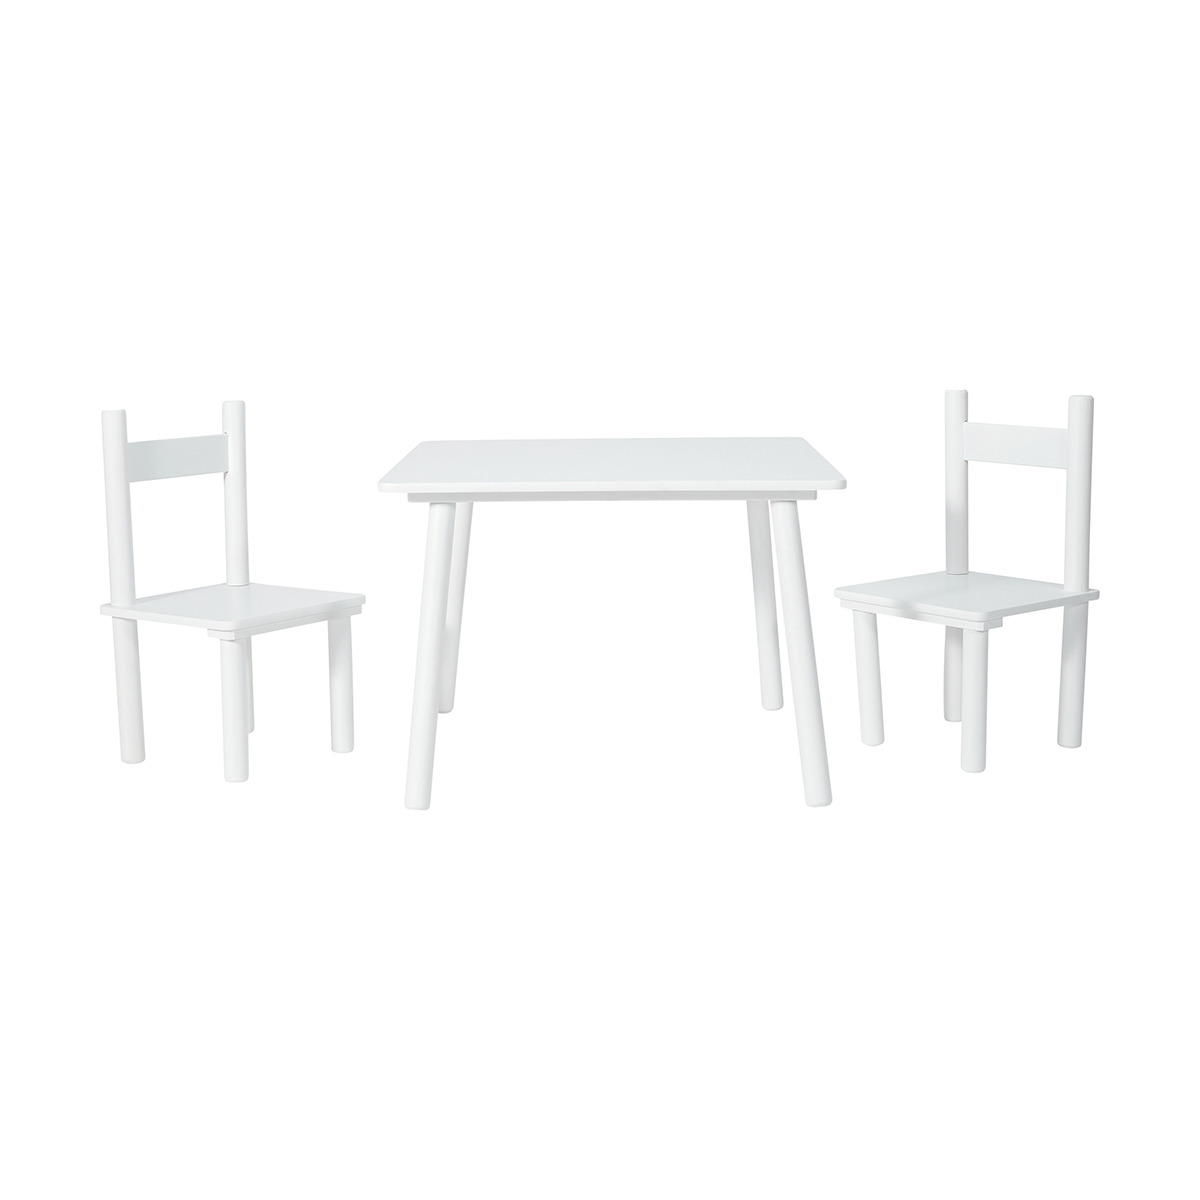 Table And Chair Set White Kmart regarding 3 piece table and chair set kmart intended for Residence